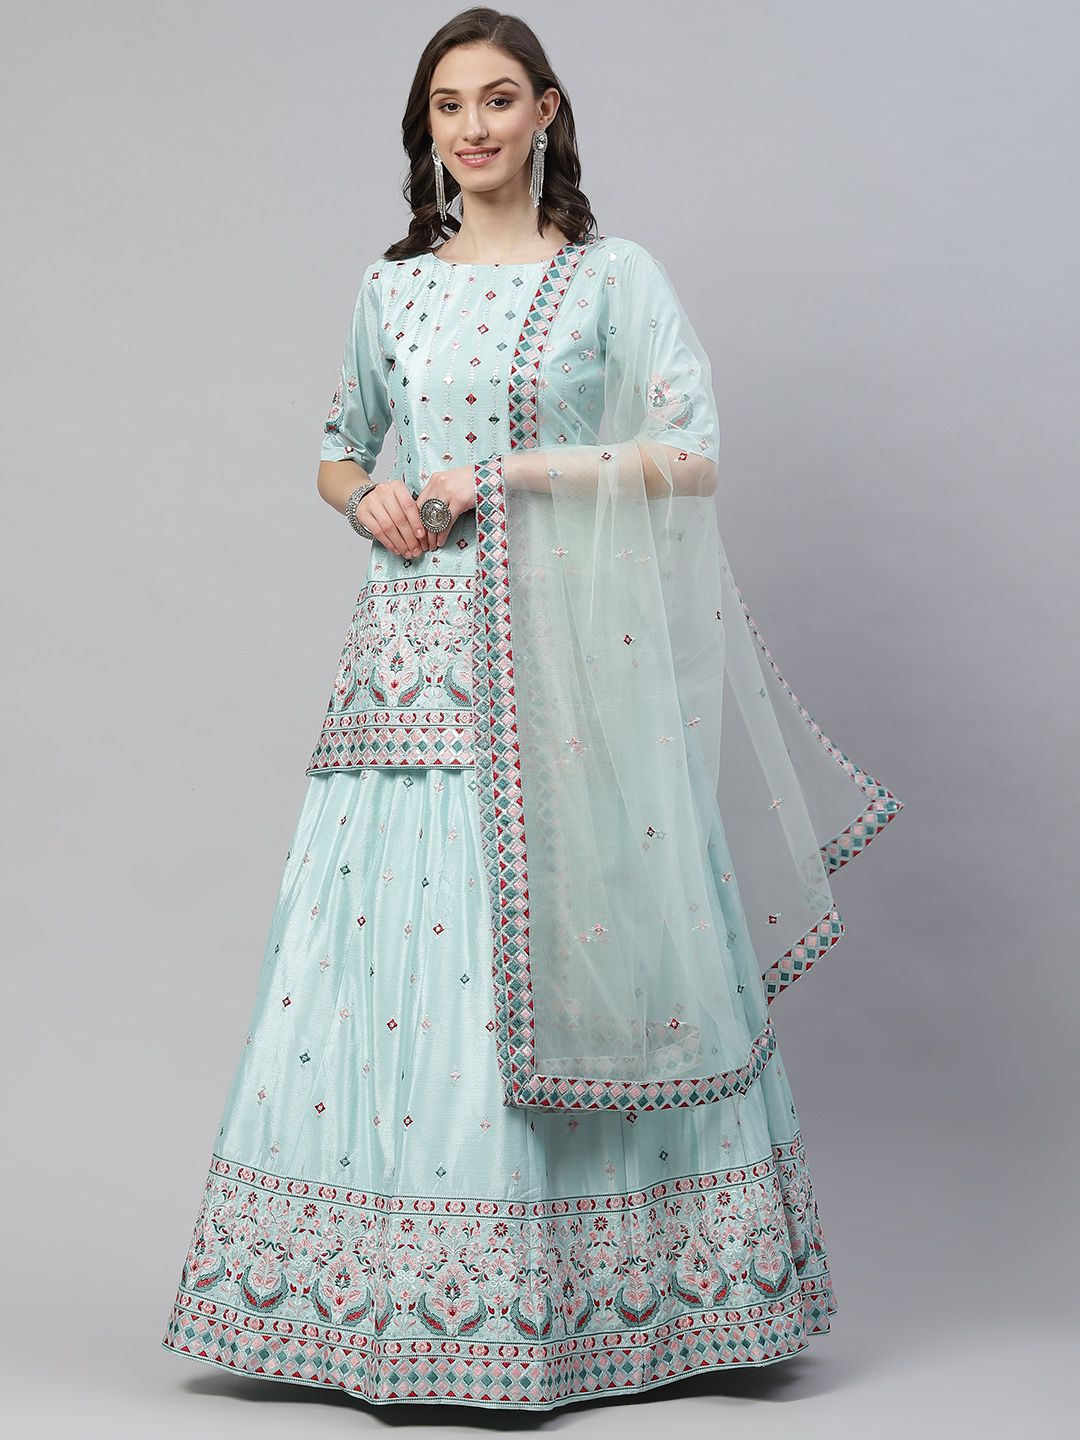 SHUBHKALA Turquoise Blue Embroidered Mirror Work Semi-Stitched Lehenga & Blouse With Dupatta Price in India